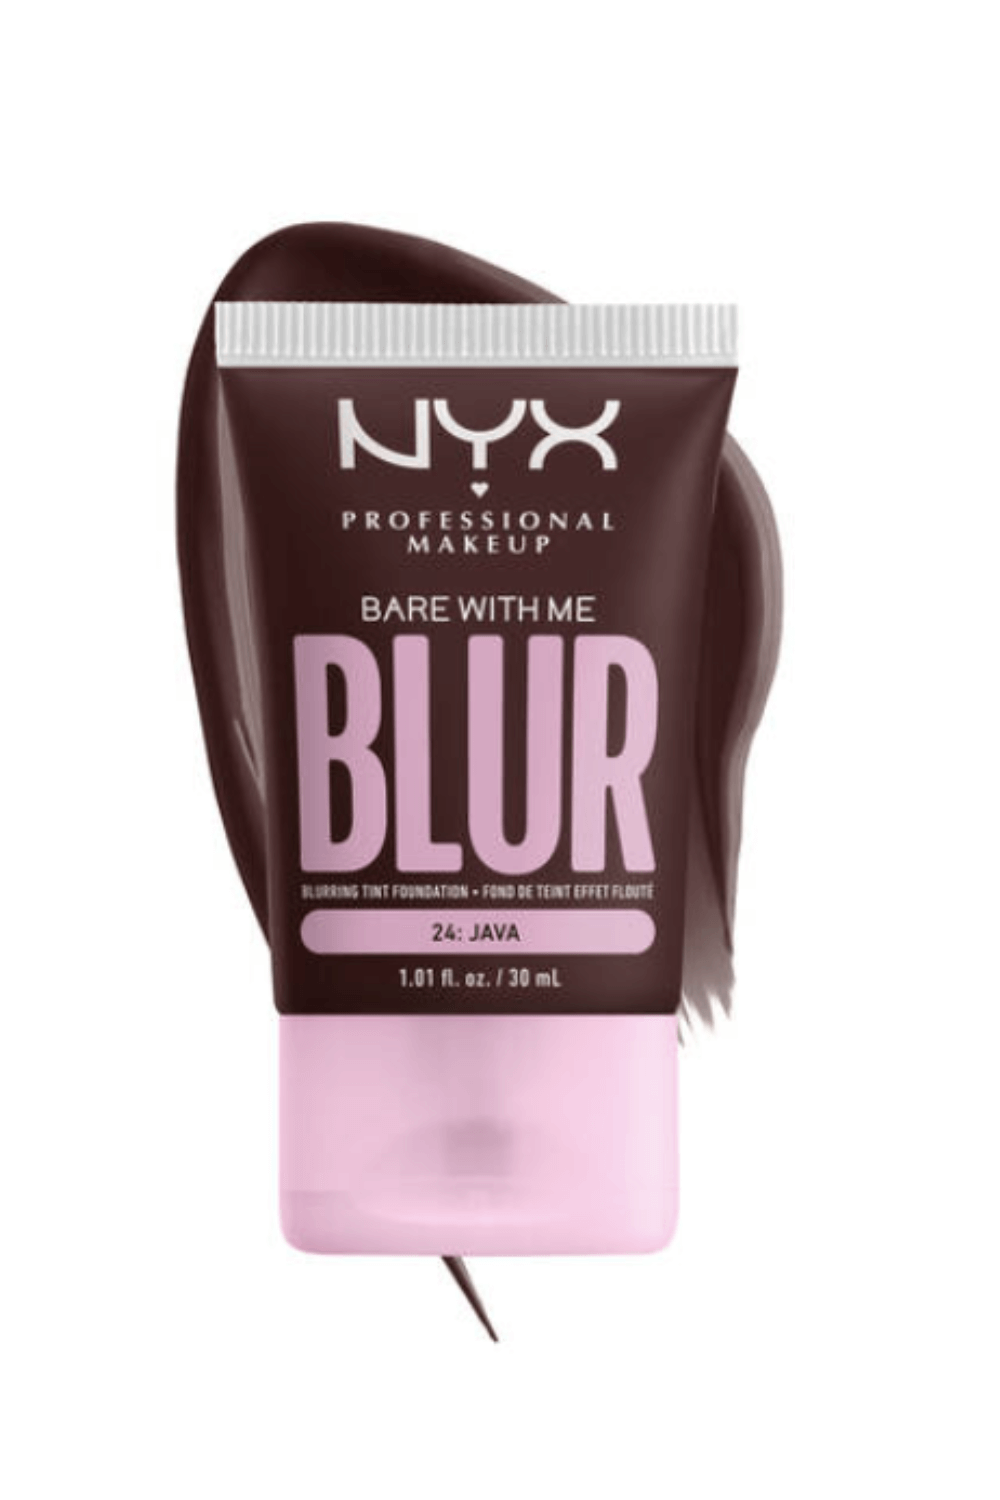 NYX - Bare With Me Blur Tint Foundation